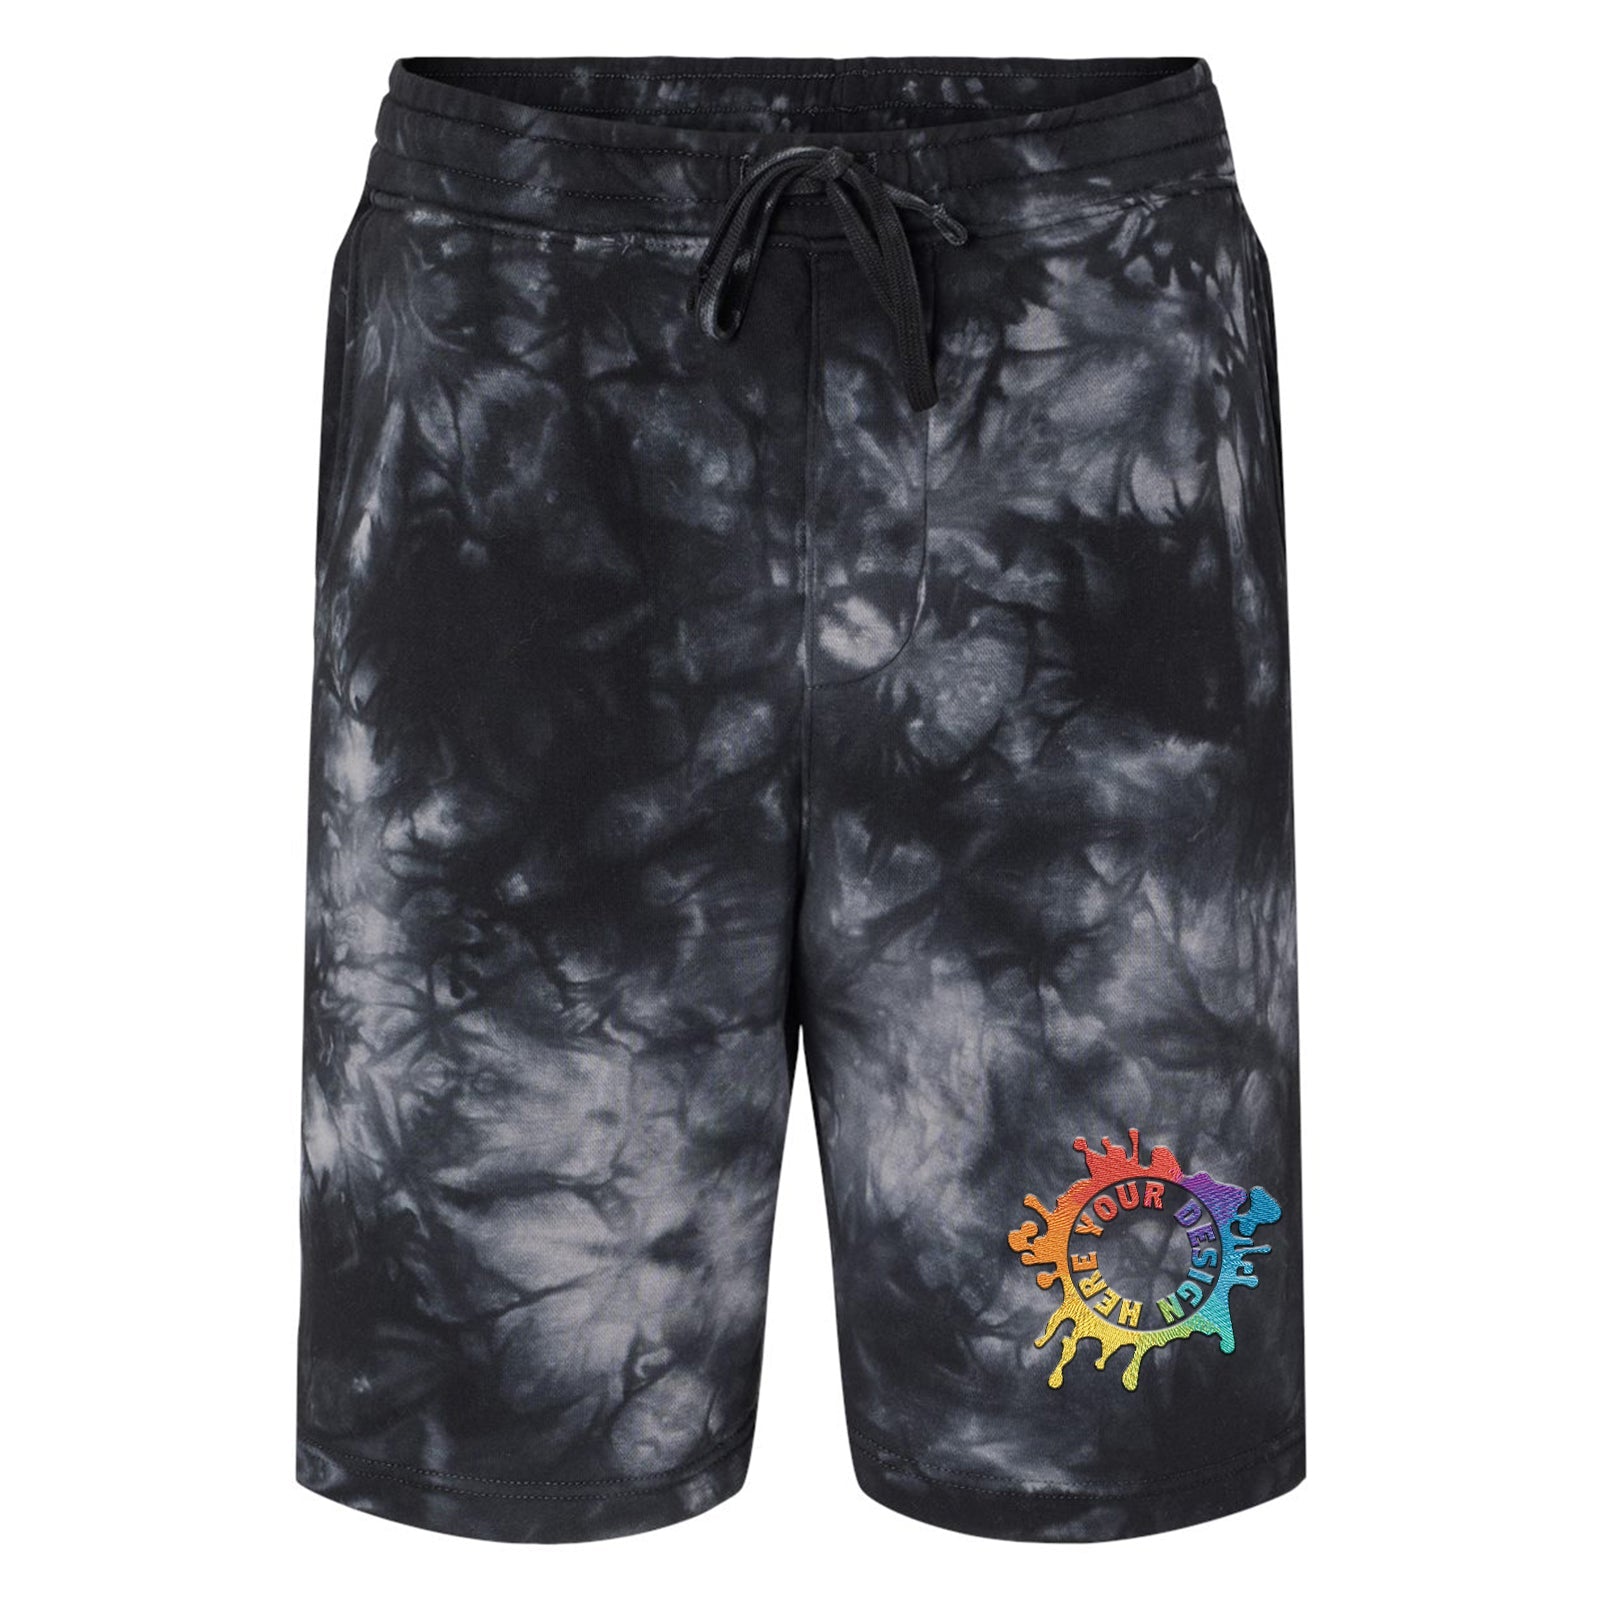 Independent Trading Co. Tie-Dyed Fleece Shorts Embroidery - Mato & Hash